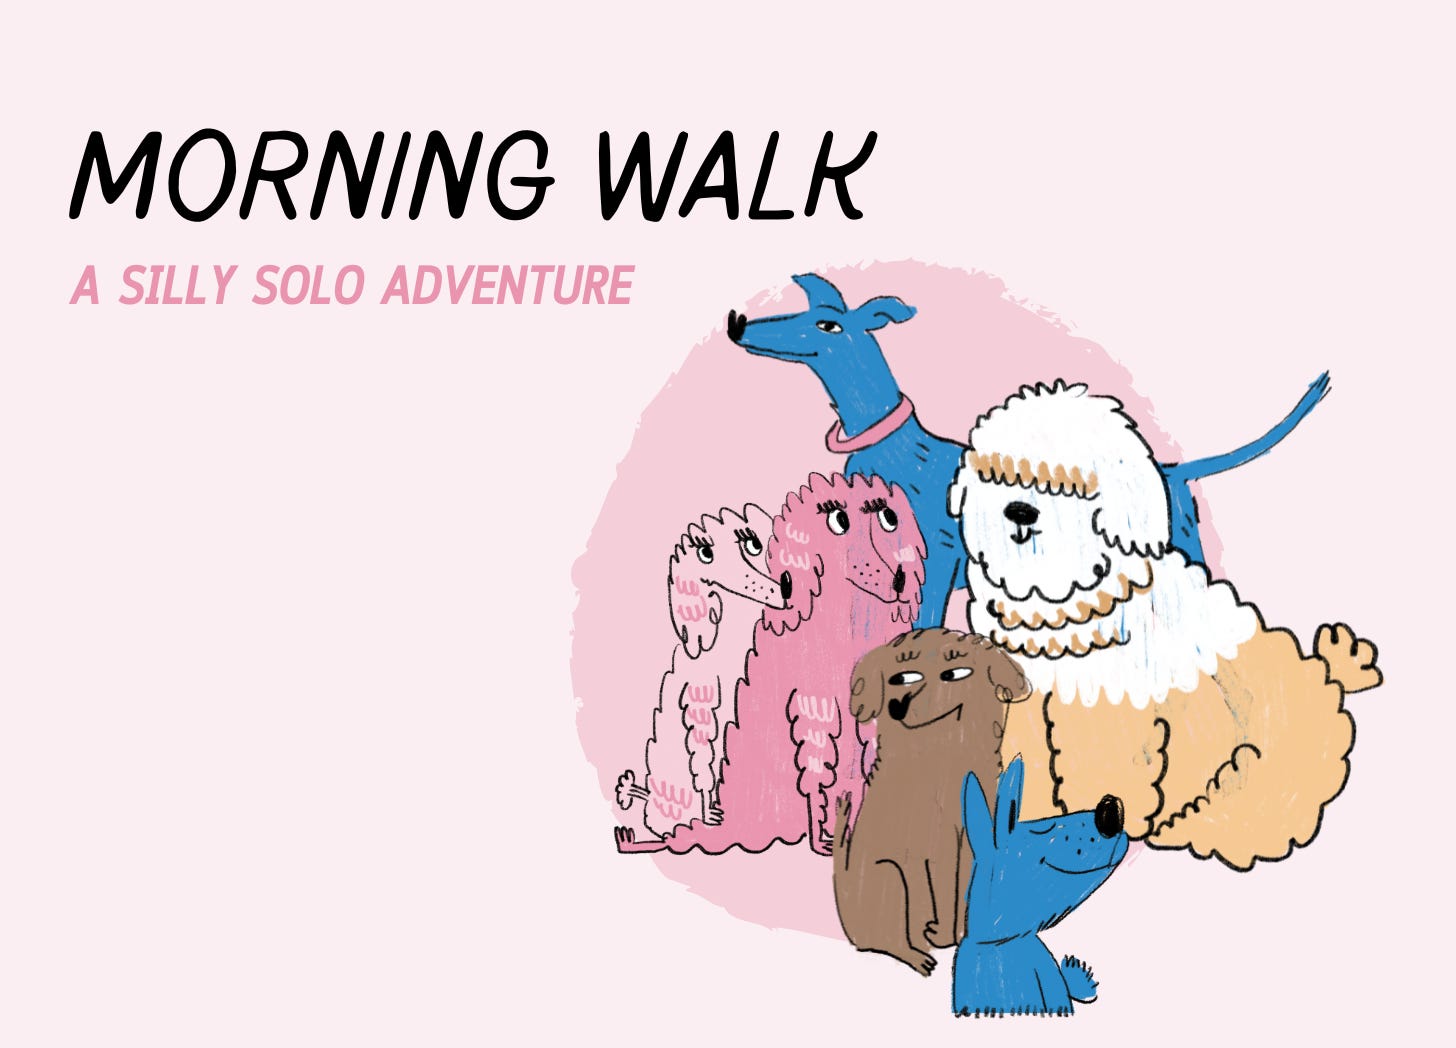 Graphic for Morning Walk: A Silly Solo Adventure. There is an illustration of cute doggies on a pink background.